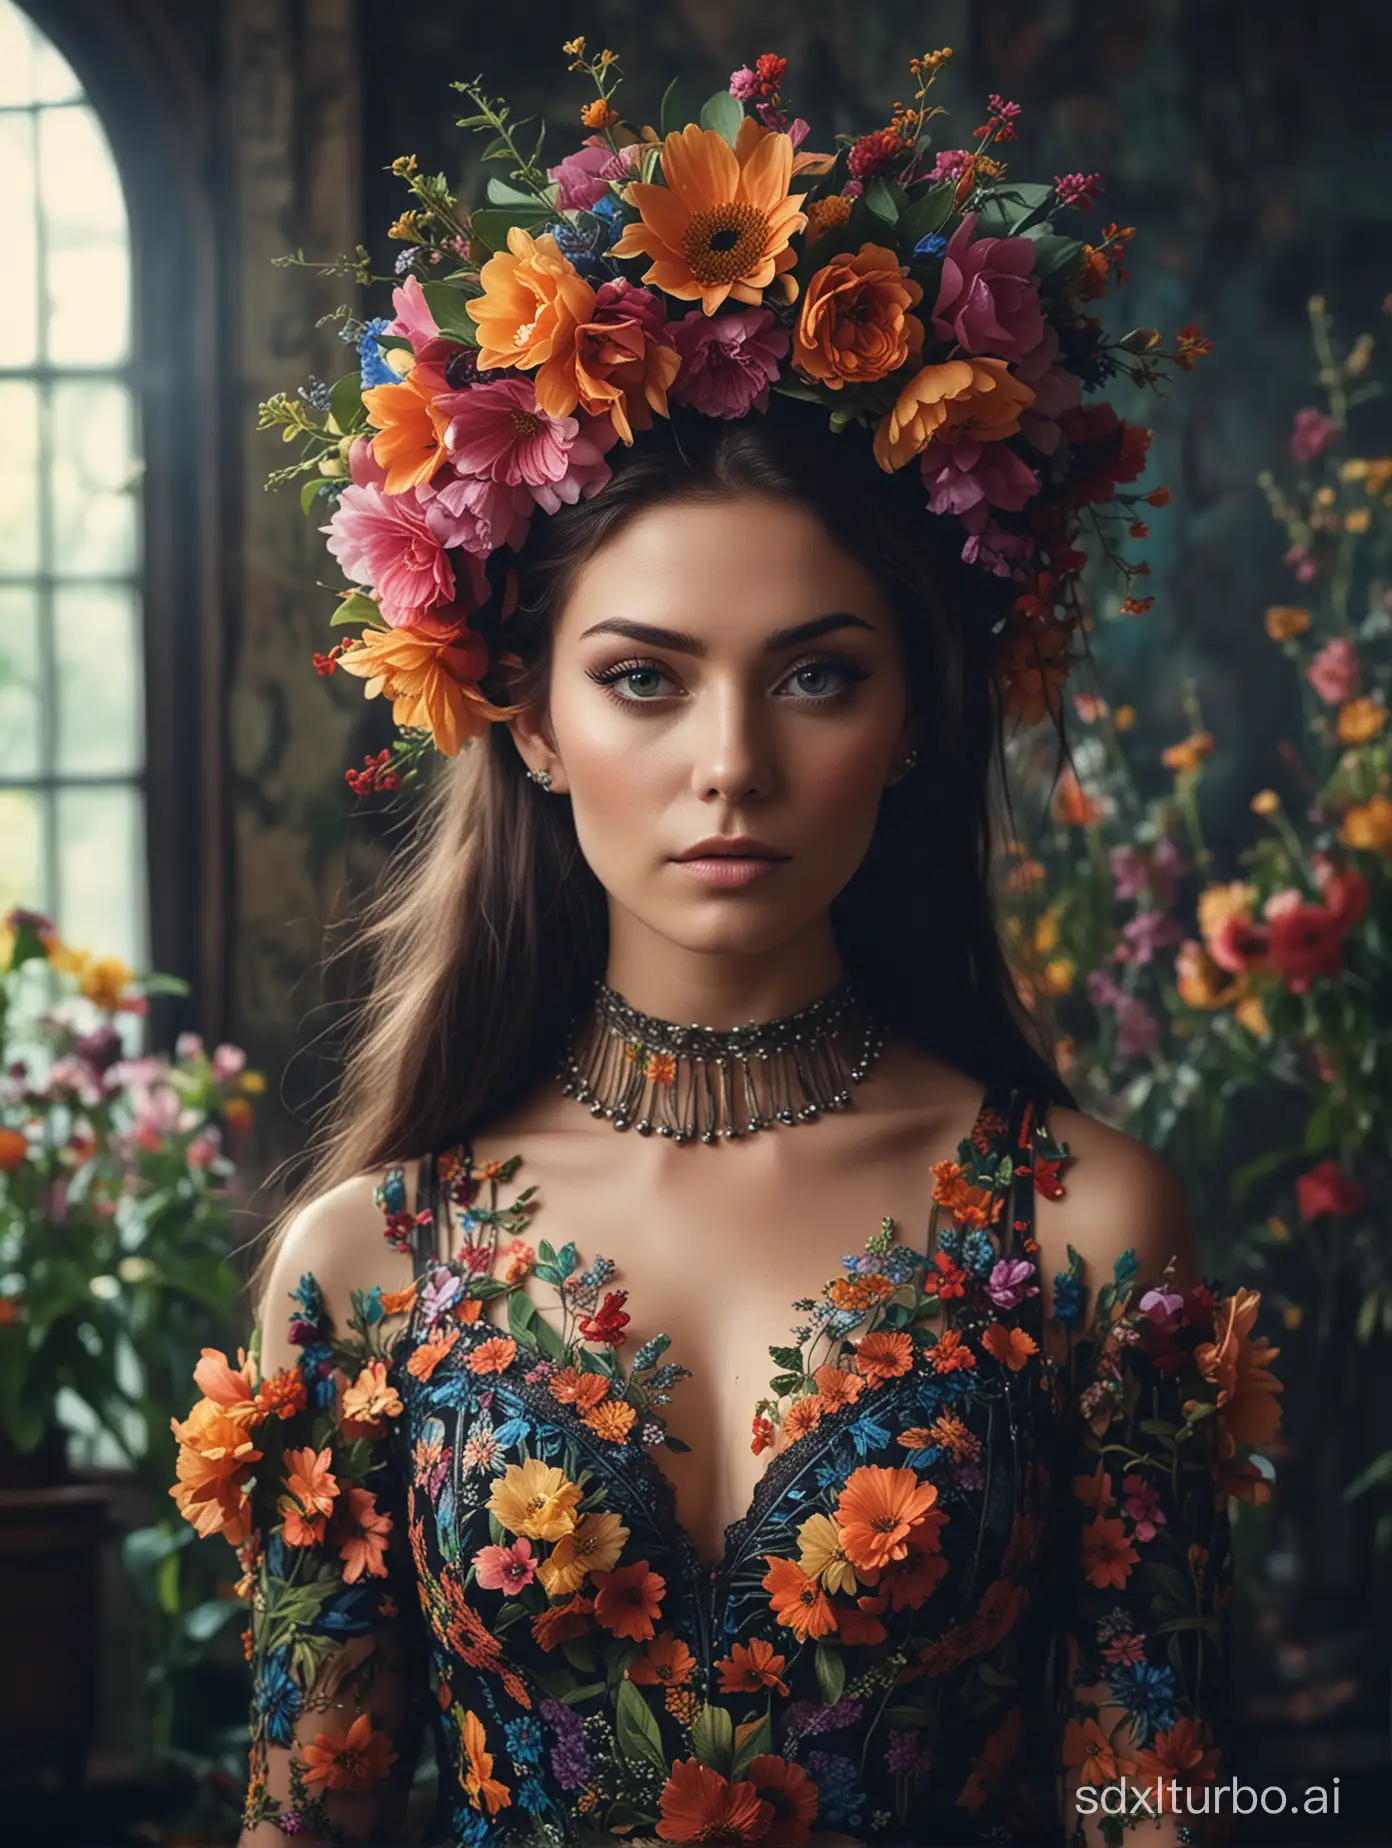 Captivating-Flowerpunk-Woman-in-Intricately-Designed-Dress-and-Floral-Headpiece